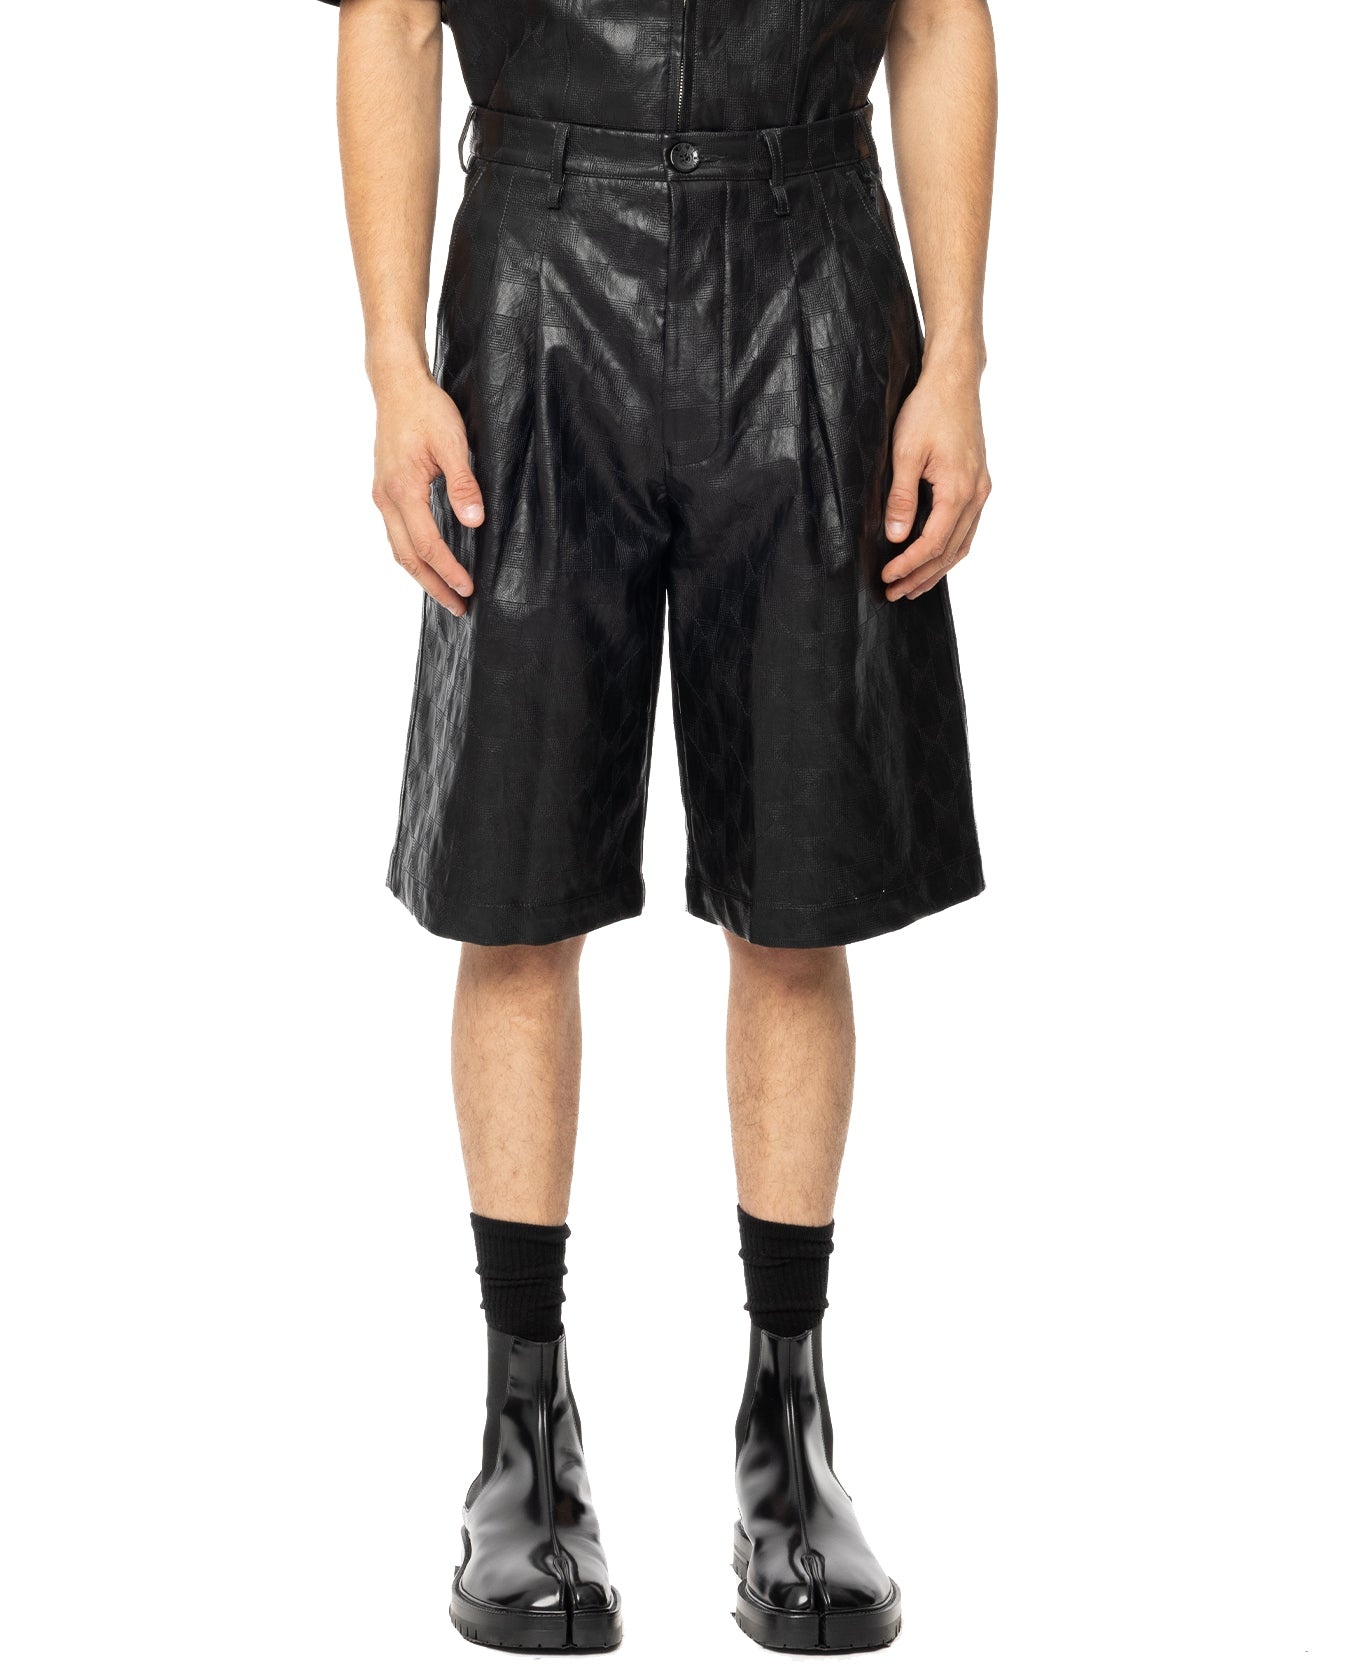 Embroidered Leather Single Pleated Shorts - Black - 1